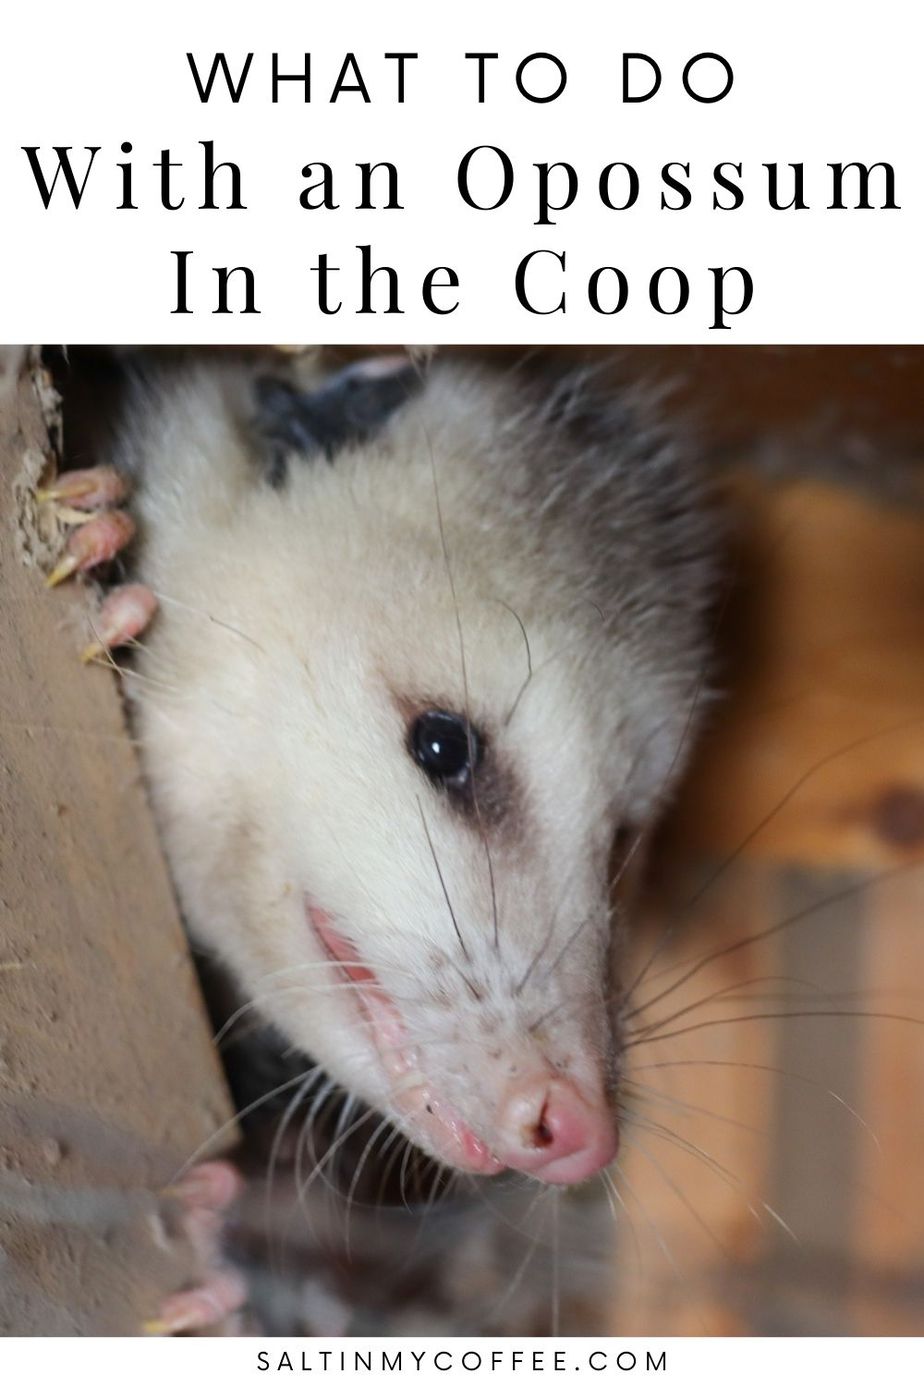 What to do with an opossum in the chicken coop